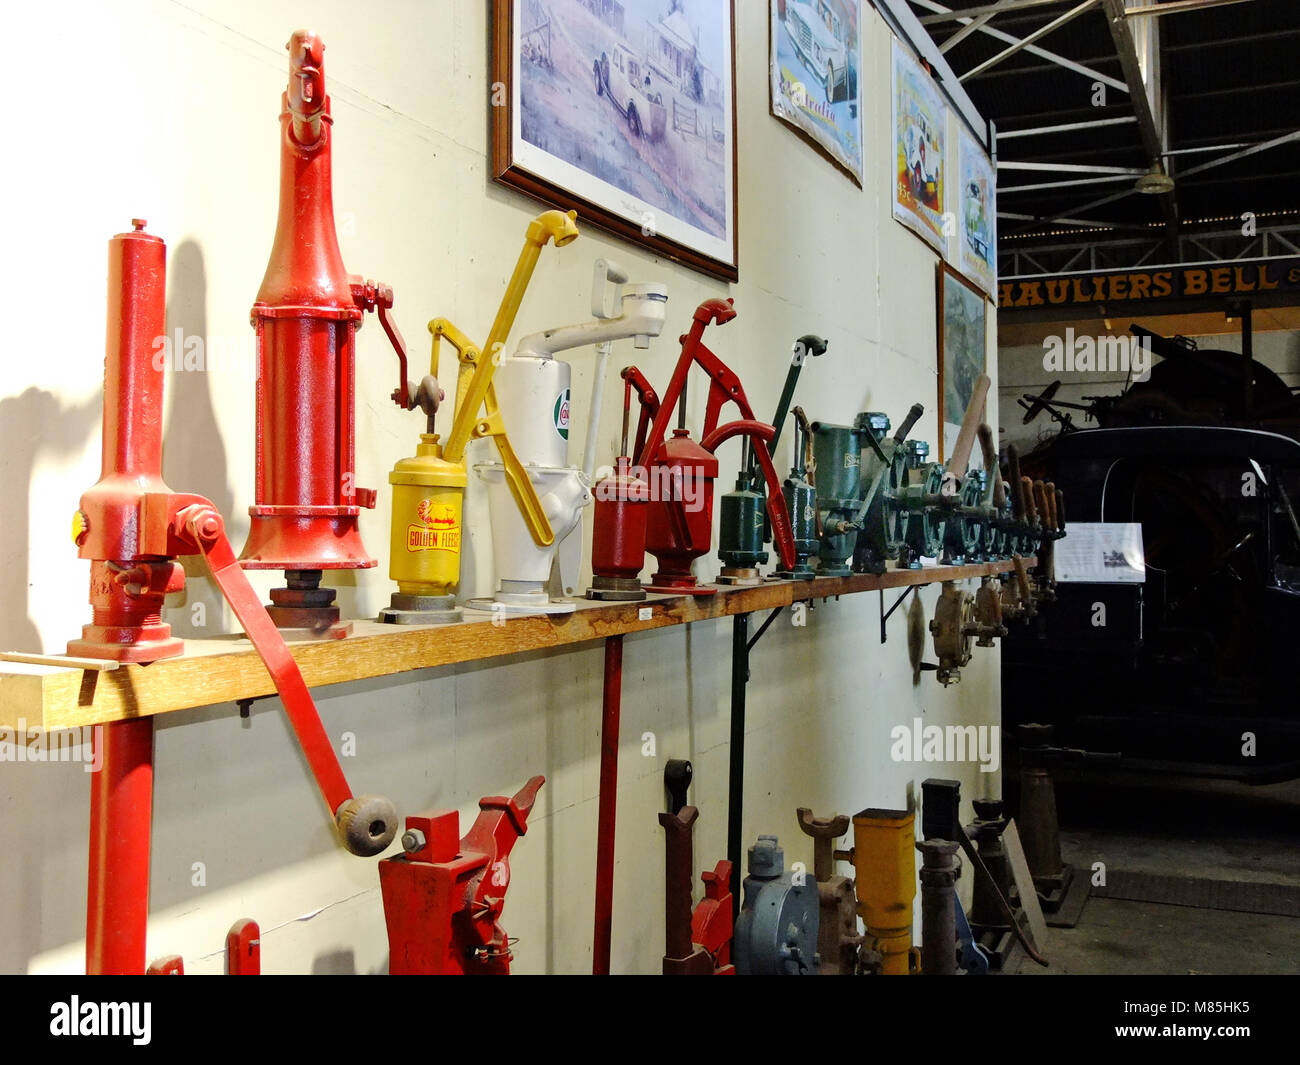 VINTAGE HAND PUMPS FOR OIL AND FUEL Stock Photo